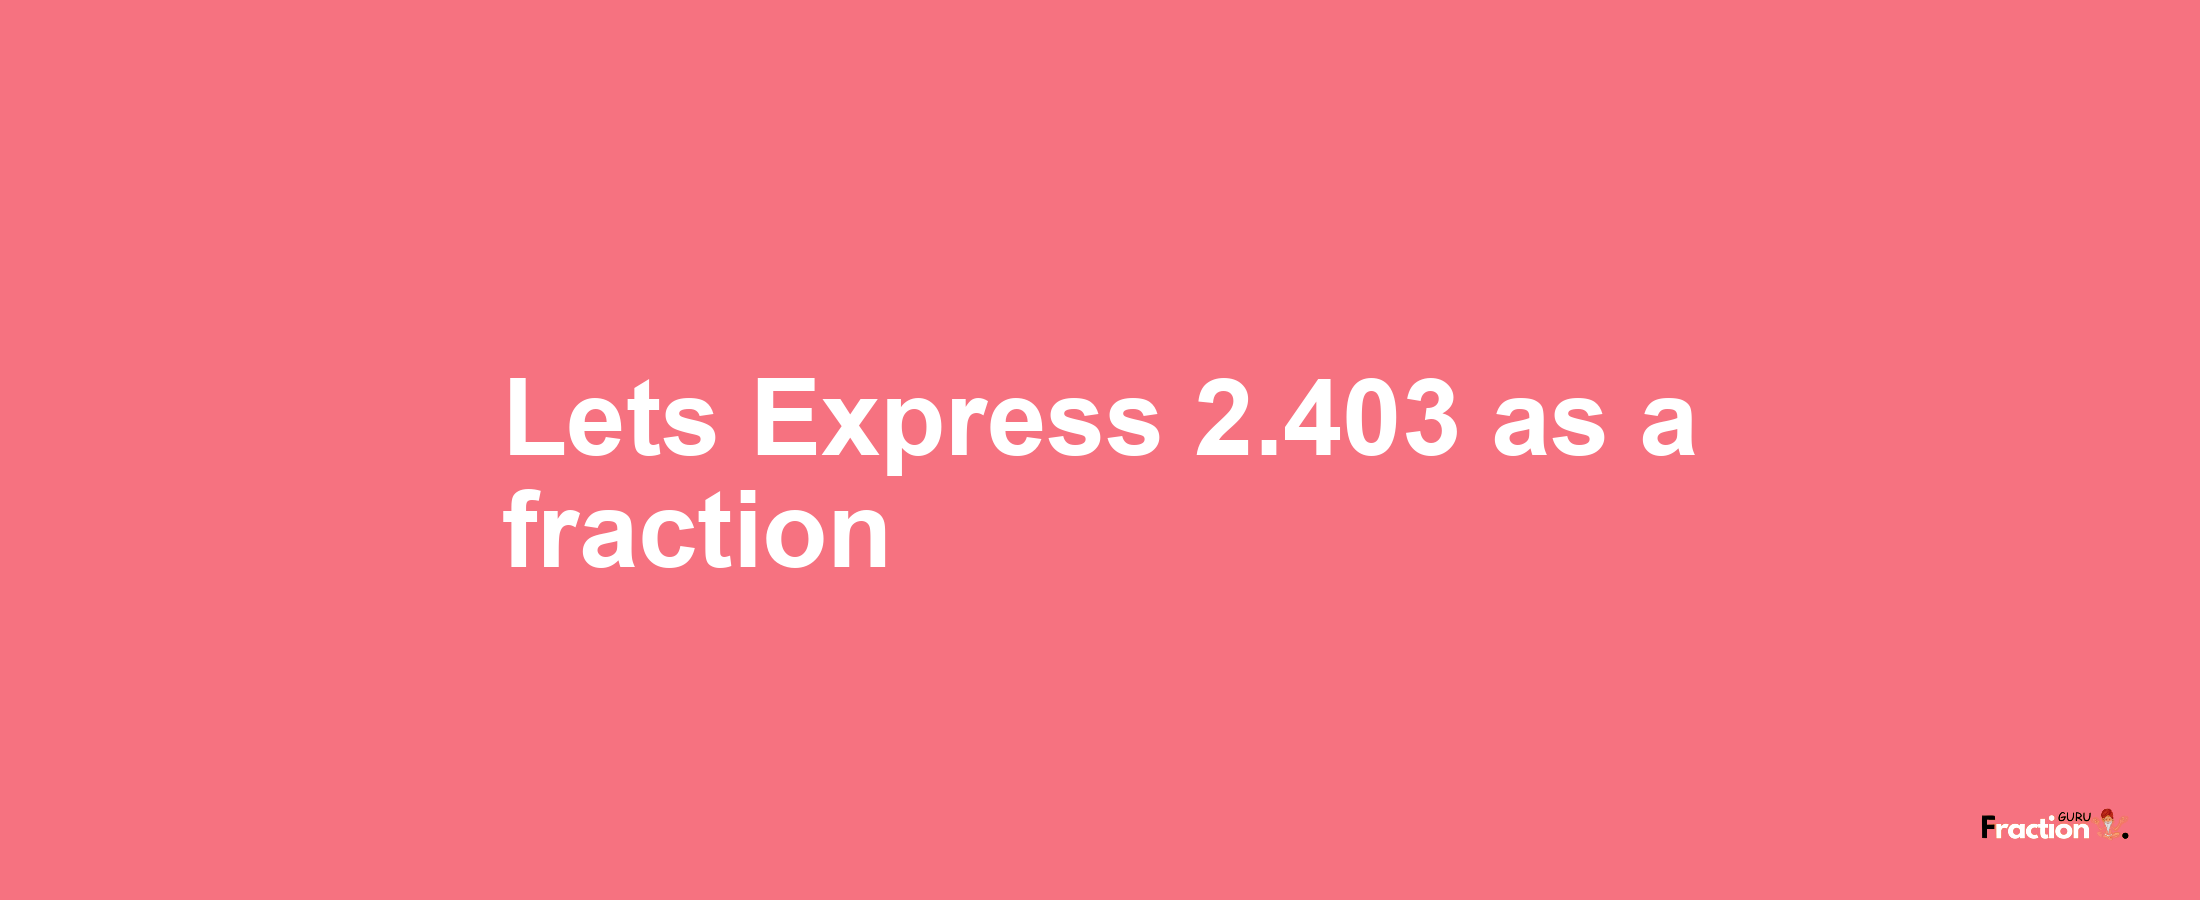 Lets Express 2.403 as afraction